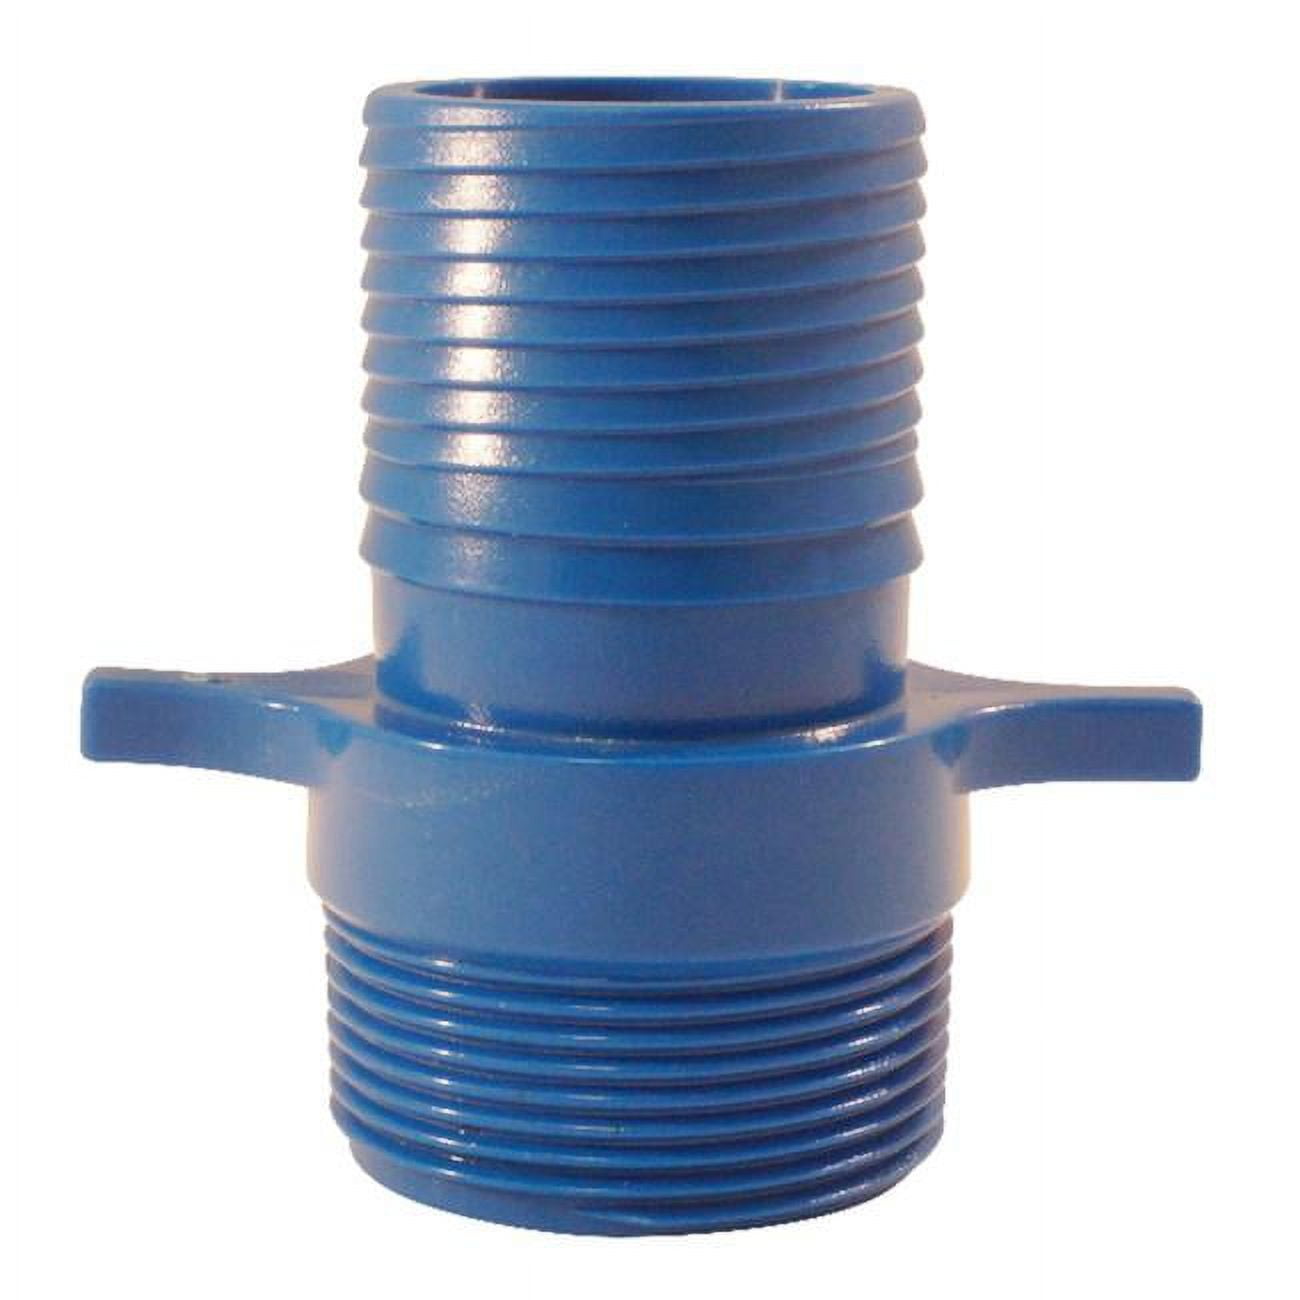 4814711 0.5 In. Insert X 0.5 In. Dia. Mpt Polypropylene Male Adapter, Blue